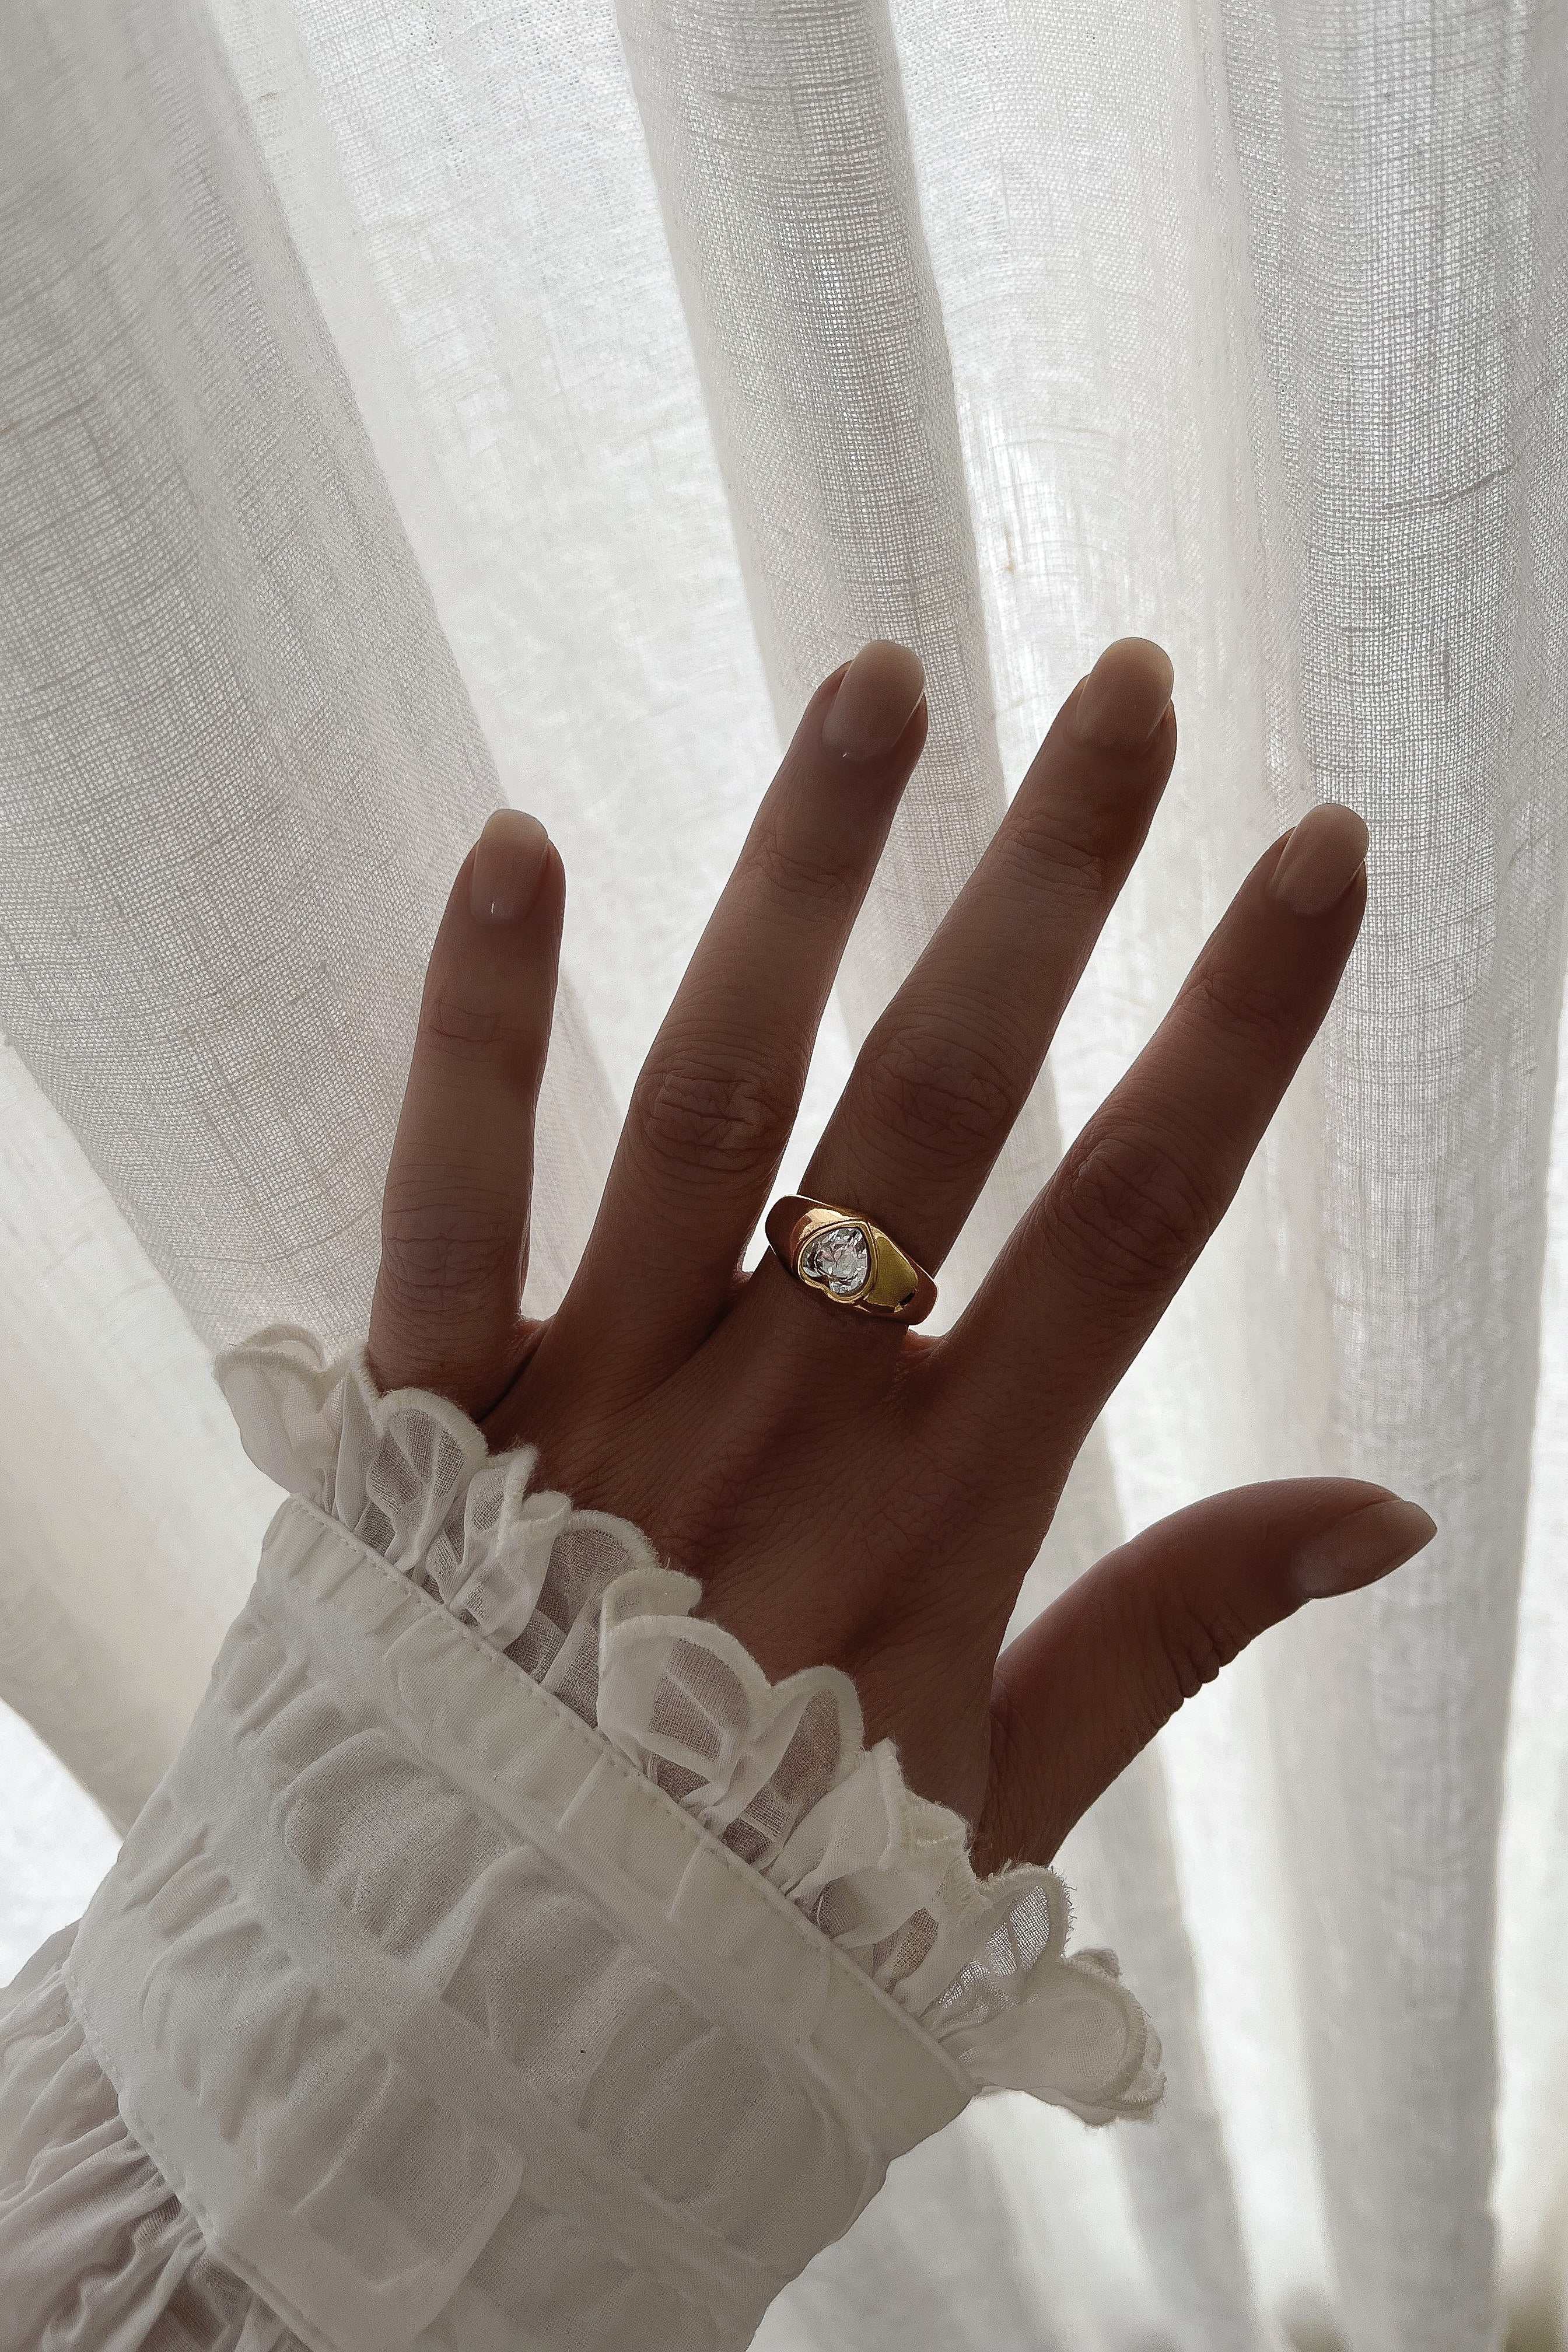 Rachelle Ring - Boutique Minimaliste has waterproof, durable, elegant and vintage inspired jewelry